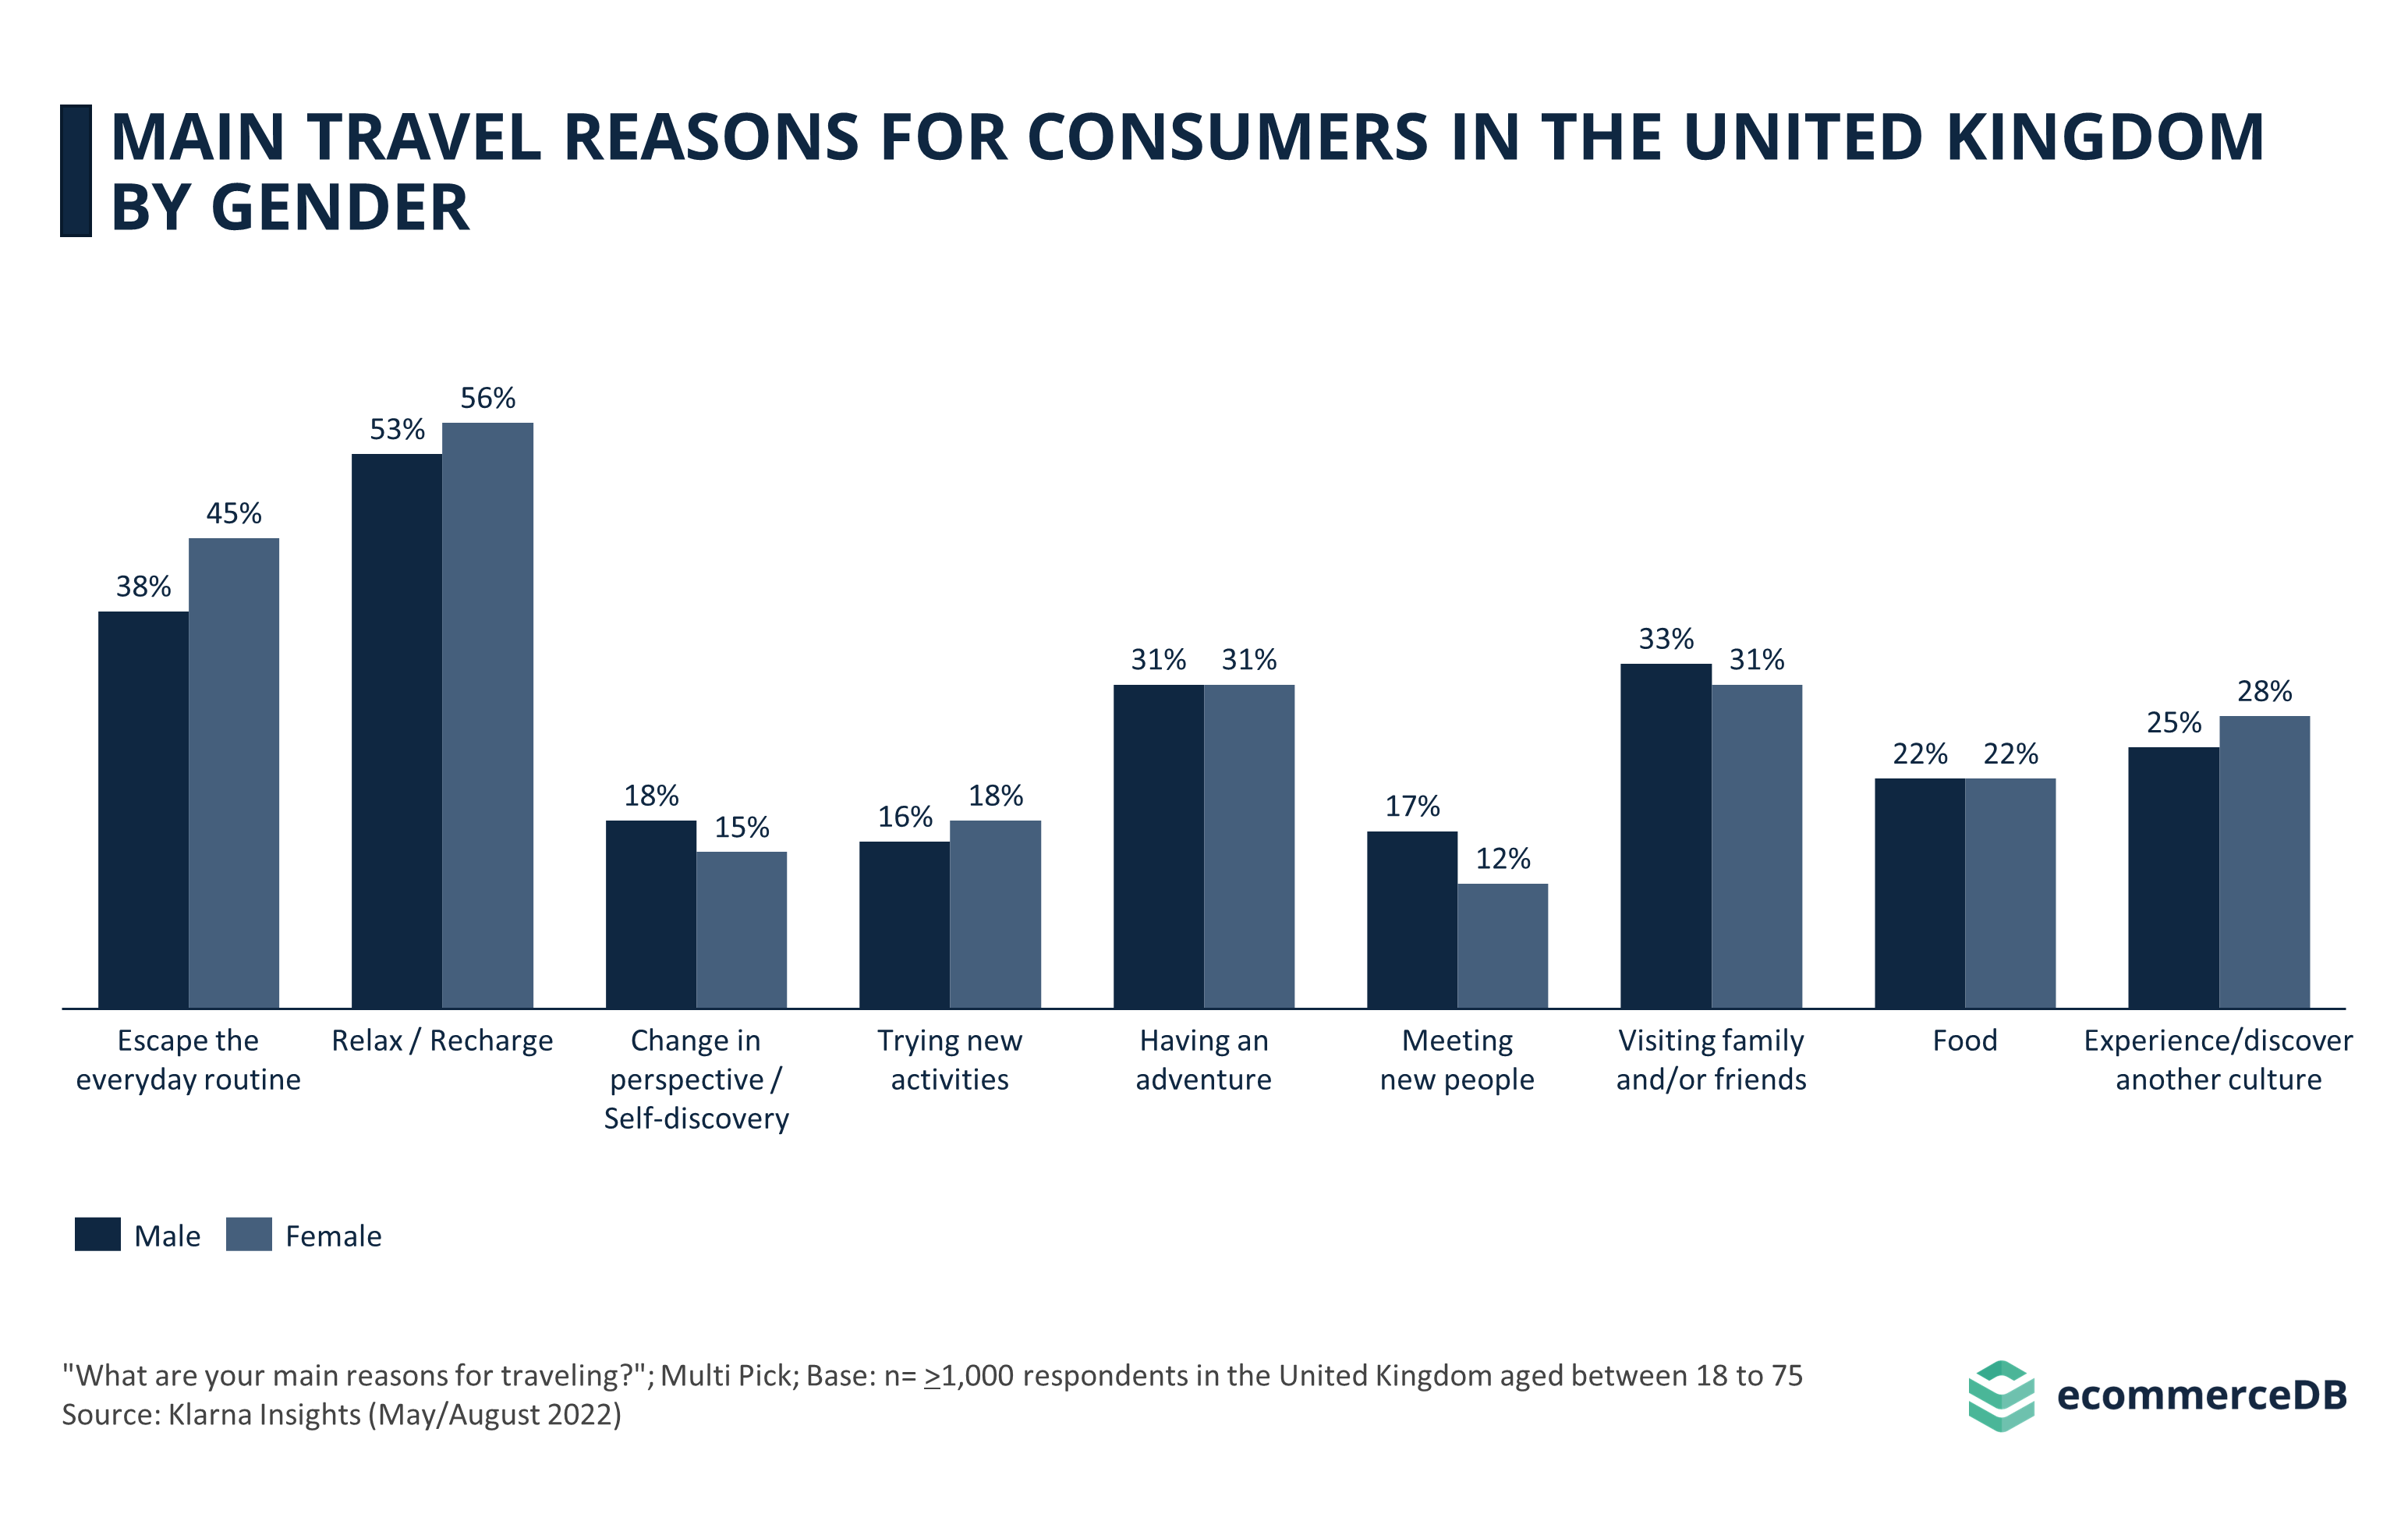 Main Travel Reasons for Consumers in the United Kingdom by Gender